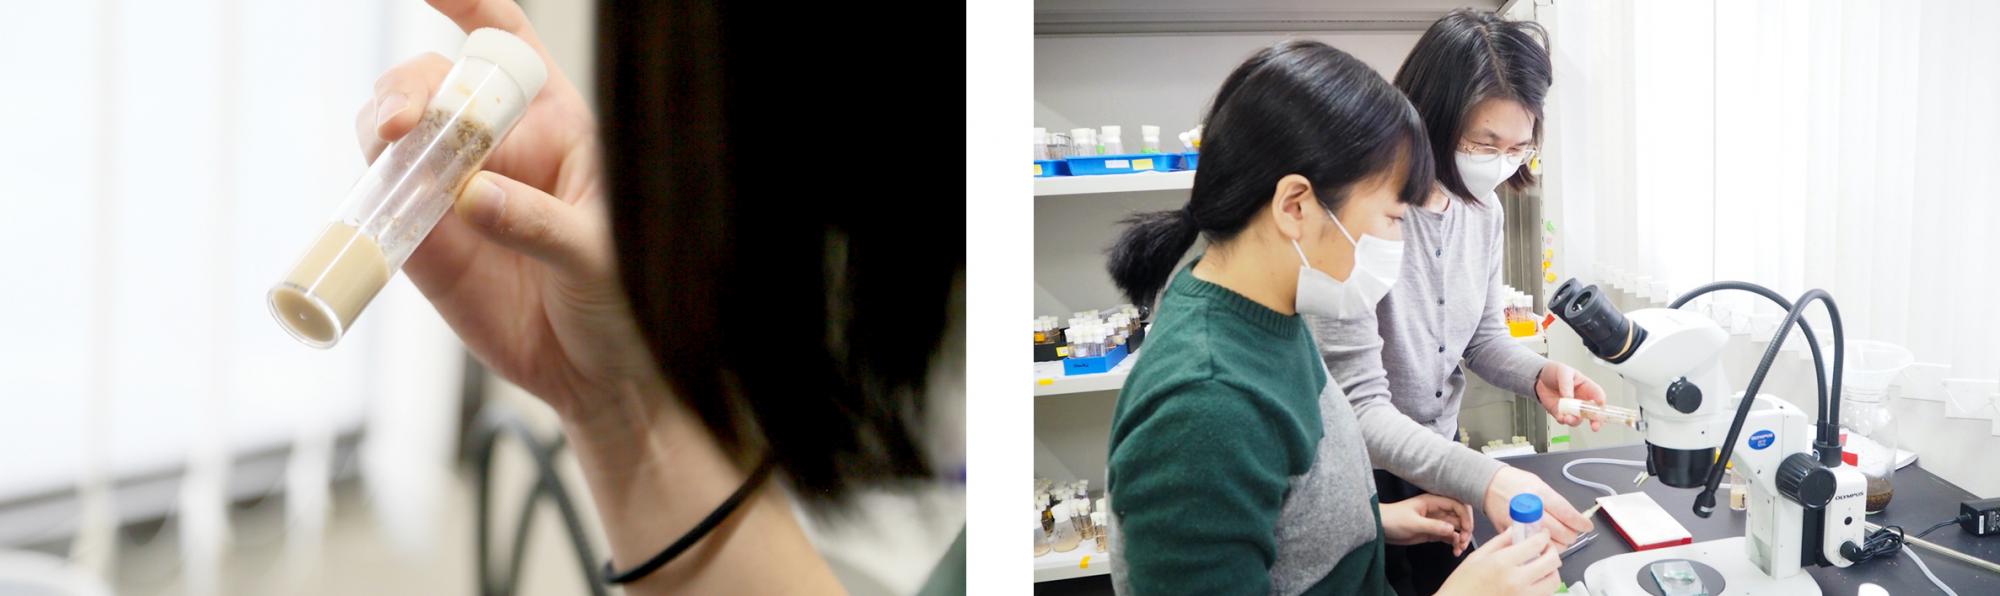 (left) Ms. YAMAGUCHI examines a small capped vial containing Drosophila in various stages of their life cycle (right) SA Assist. Prof. SUYAMA carefully explains how the experiment is to proceed to Ms. YAMAGUCHI